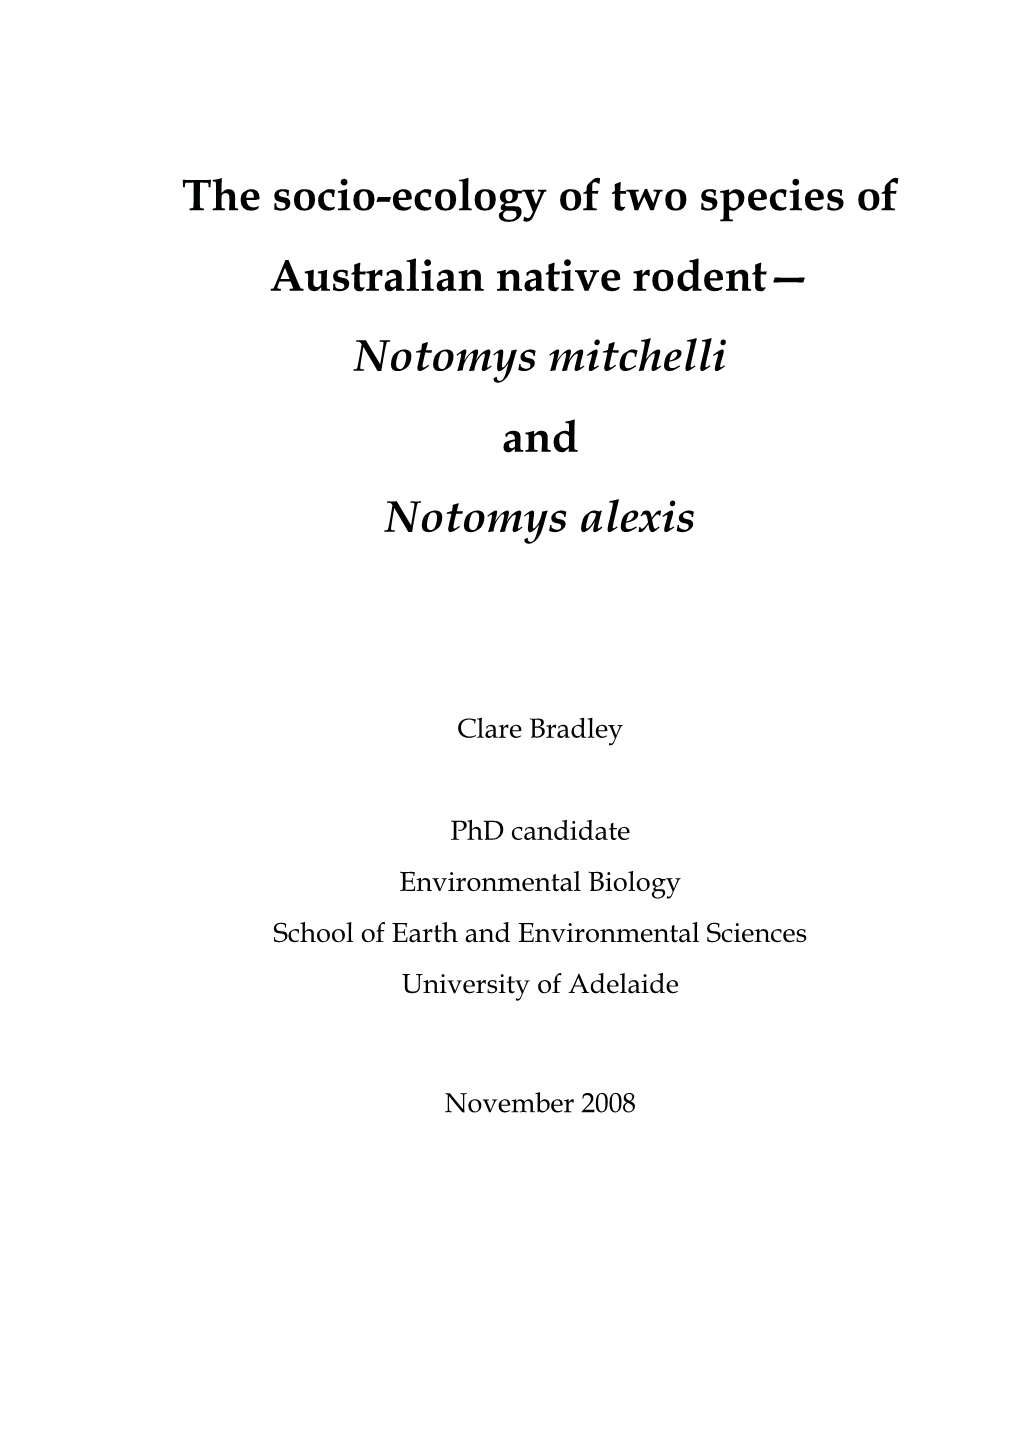 The Socio-Ecology of Two Species of Australian Native Rodent— Notomys Mitchelli and Notomys Alexis